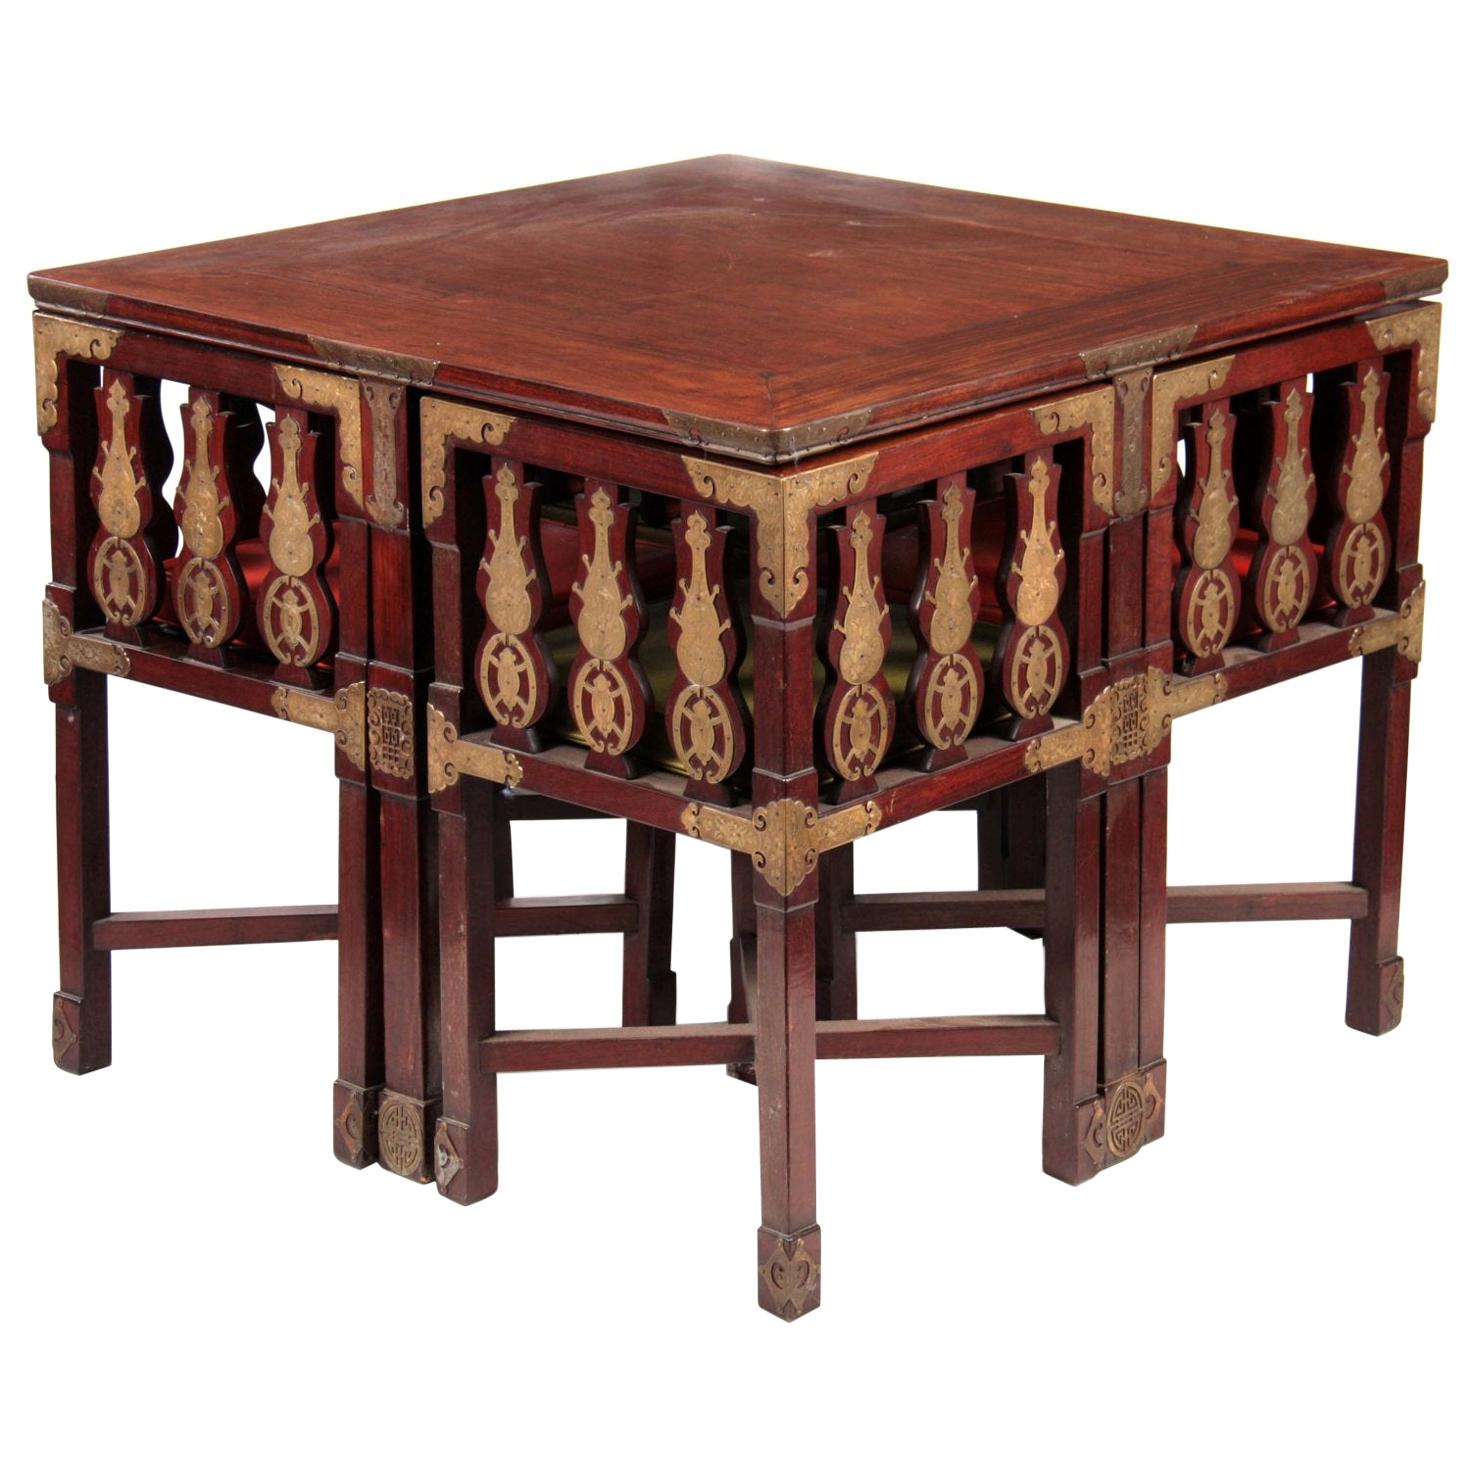 Japanese Rosewood Dining Table & 4 Chairs with Etched Decorative Brass Plaques.